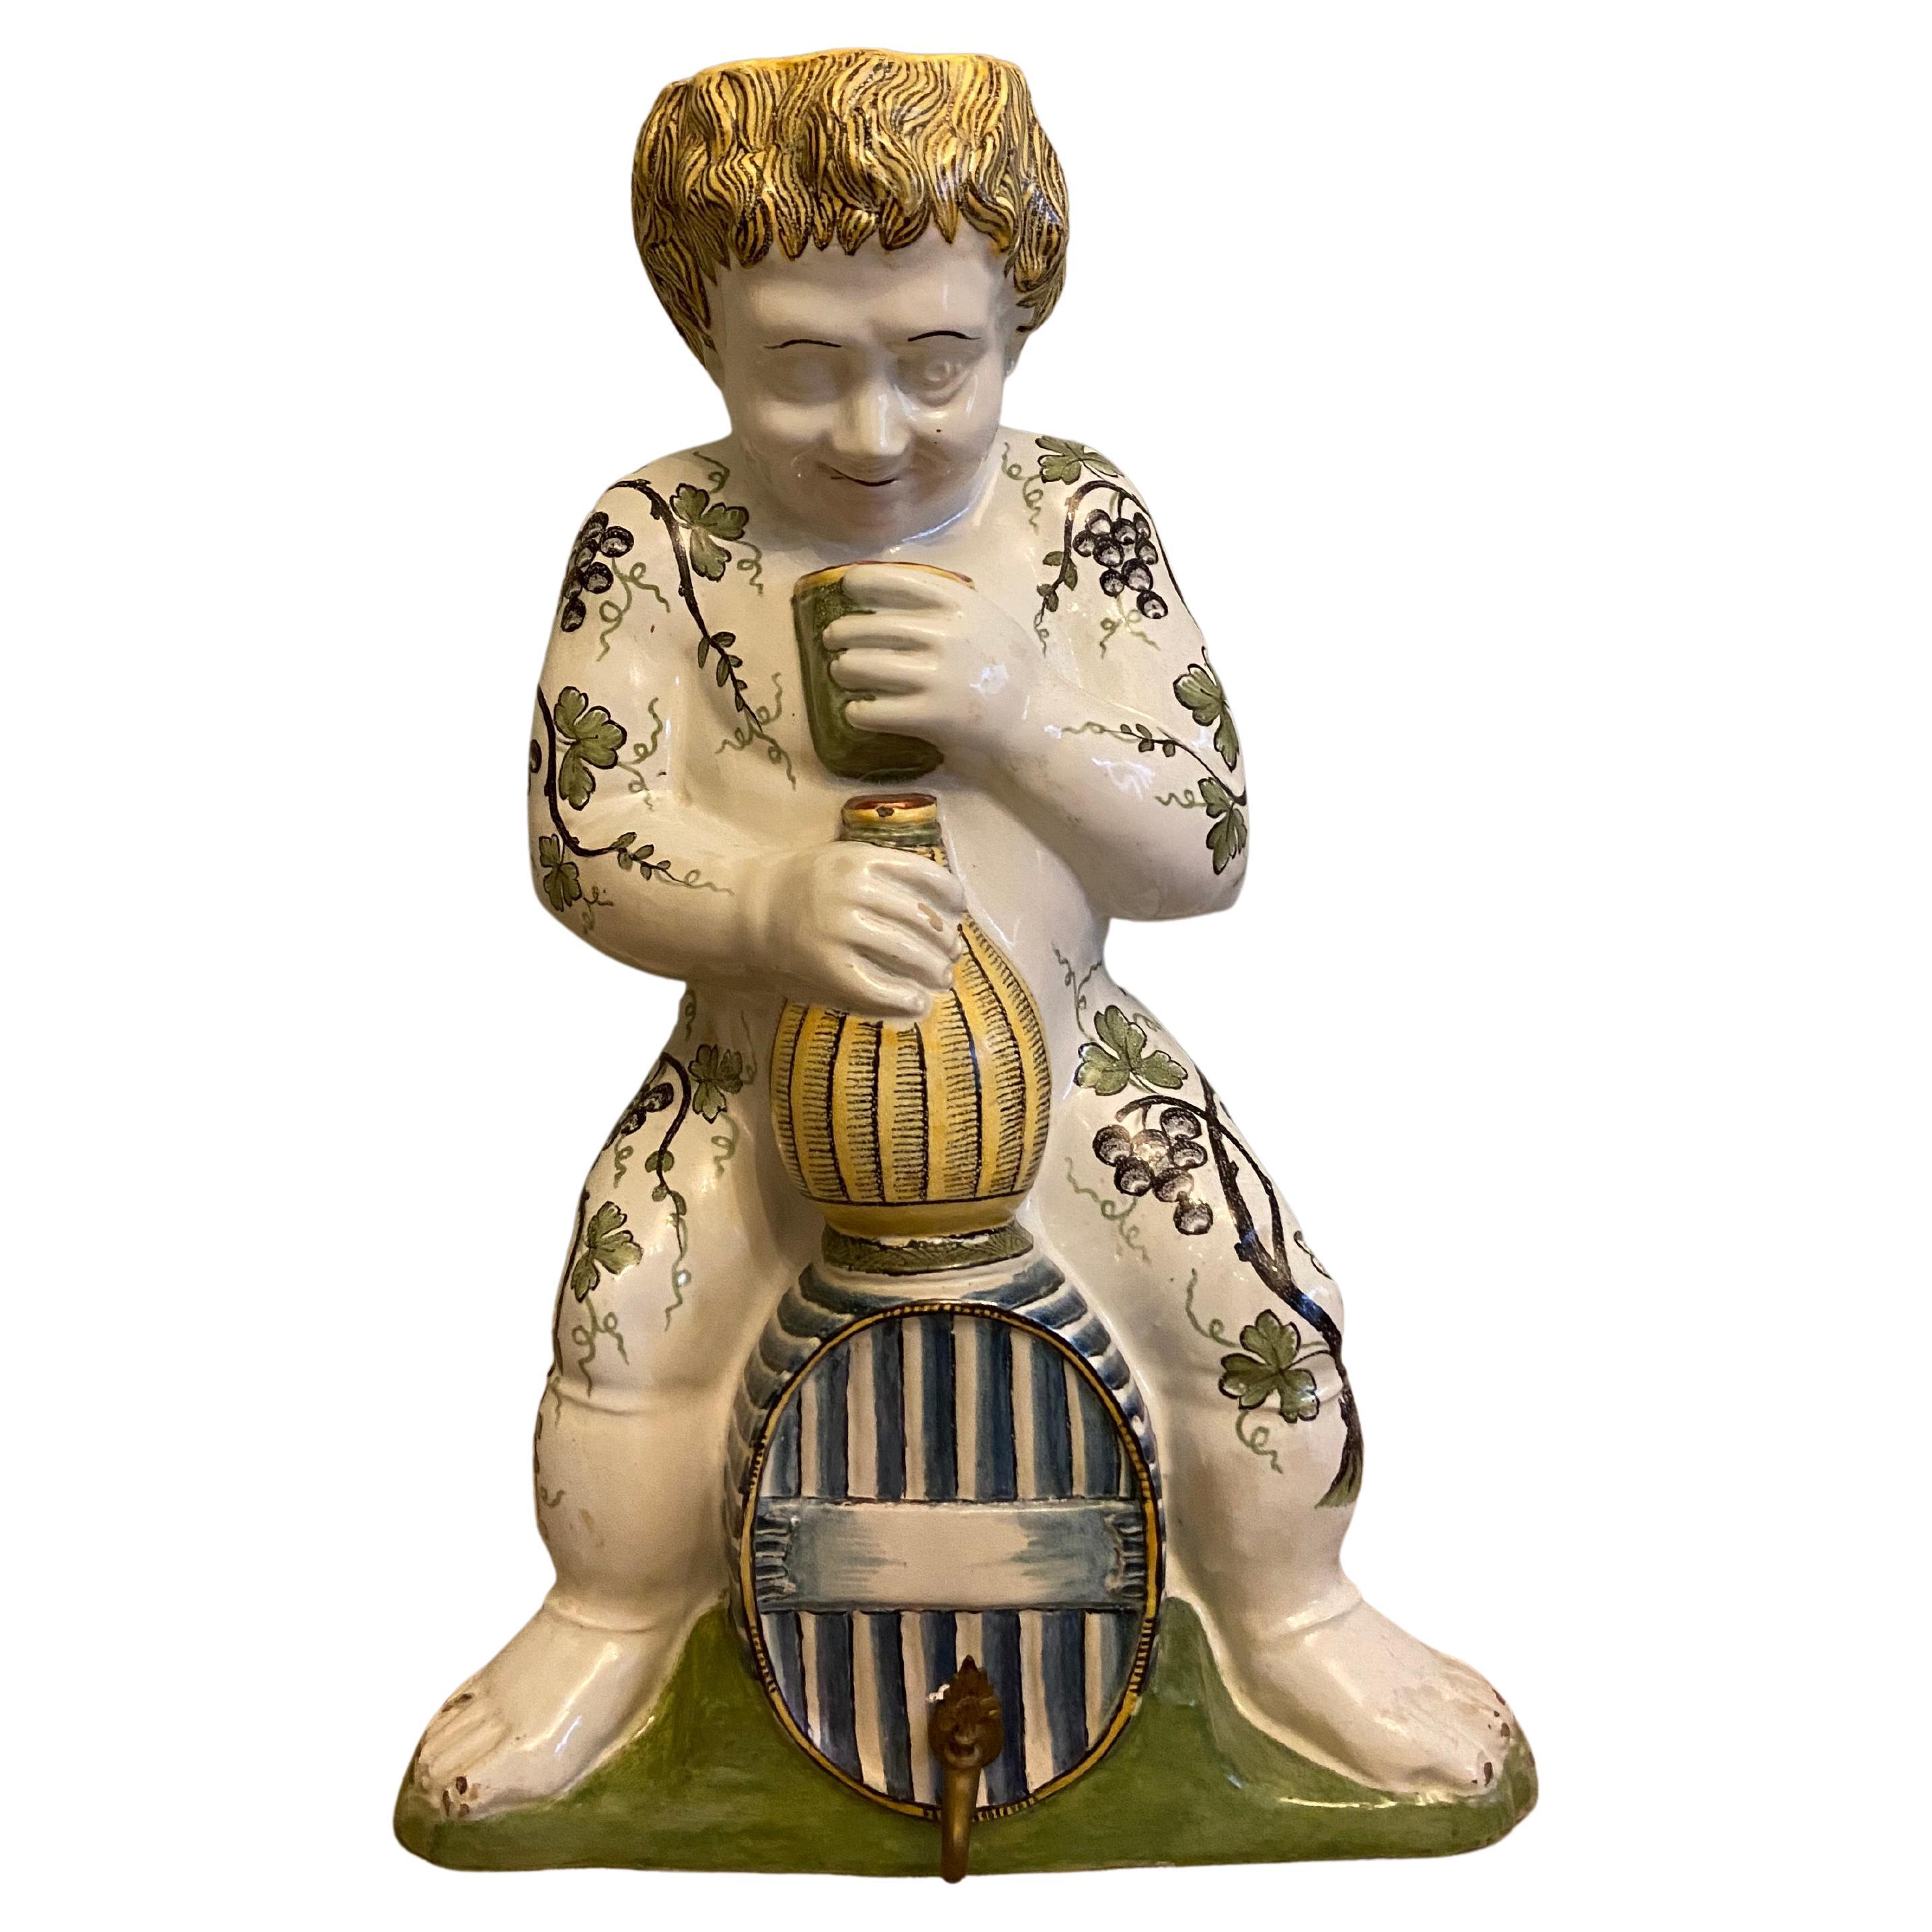 Rouen Faience in the Shape of a Young Bacchus, 18th Century